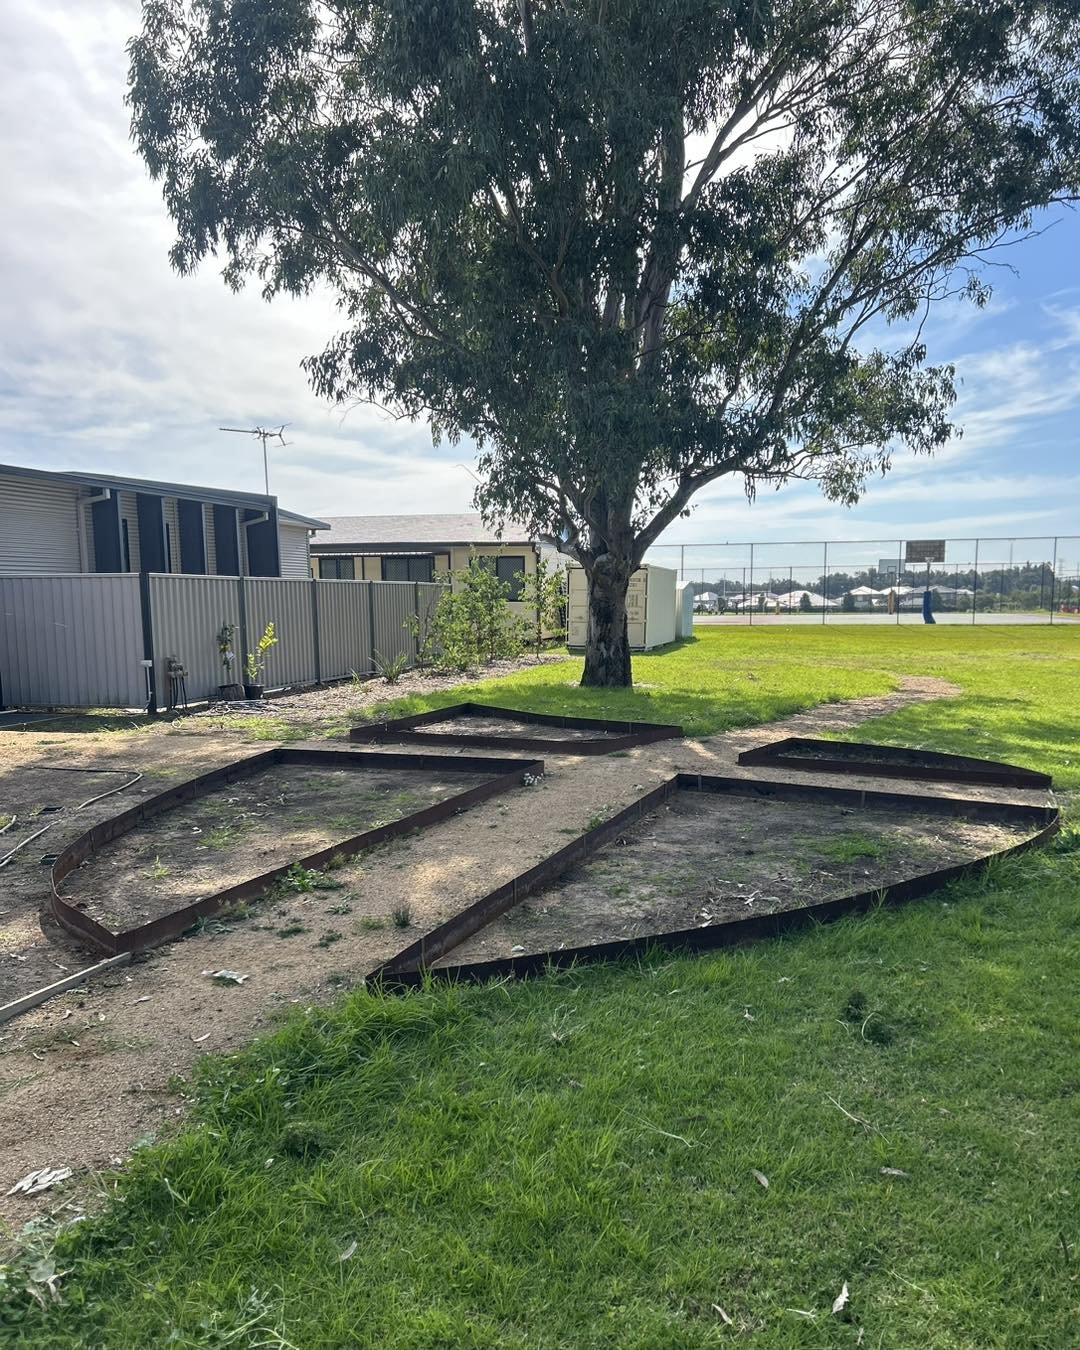 After total remediation and demolition of our community garden due to contaminated mulch, today we had a chance to go back and redo and rectify our custom Garden edging which has been fabricated to represent the Church emblem. Now time for the next p